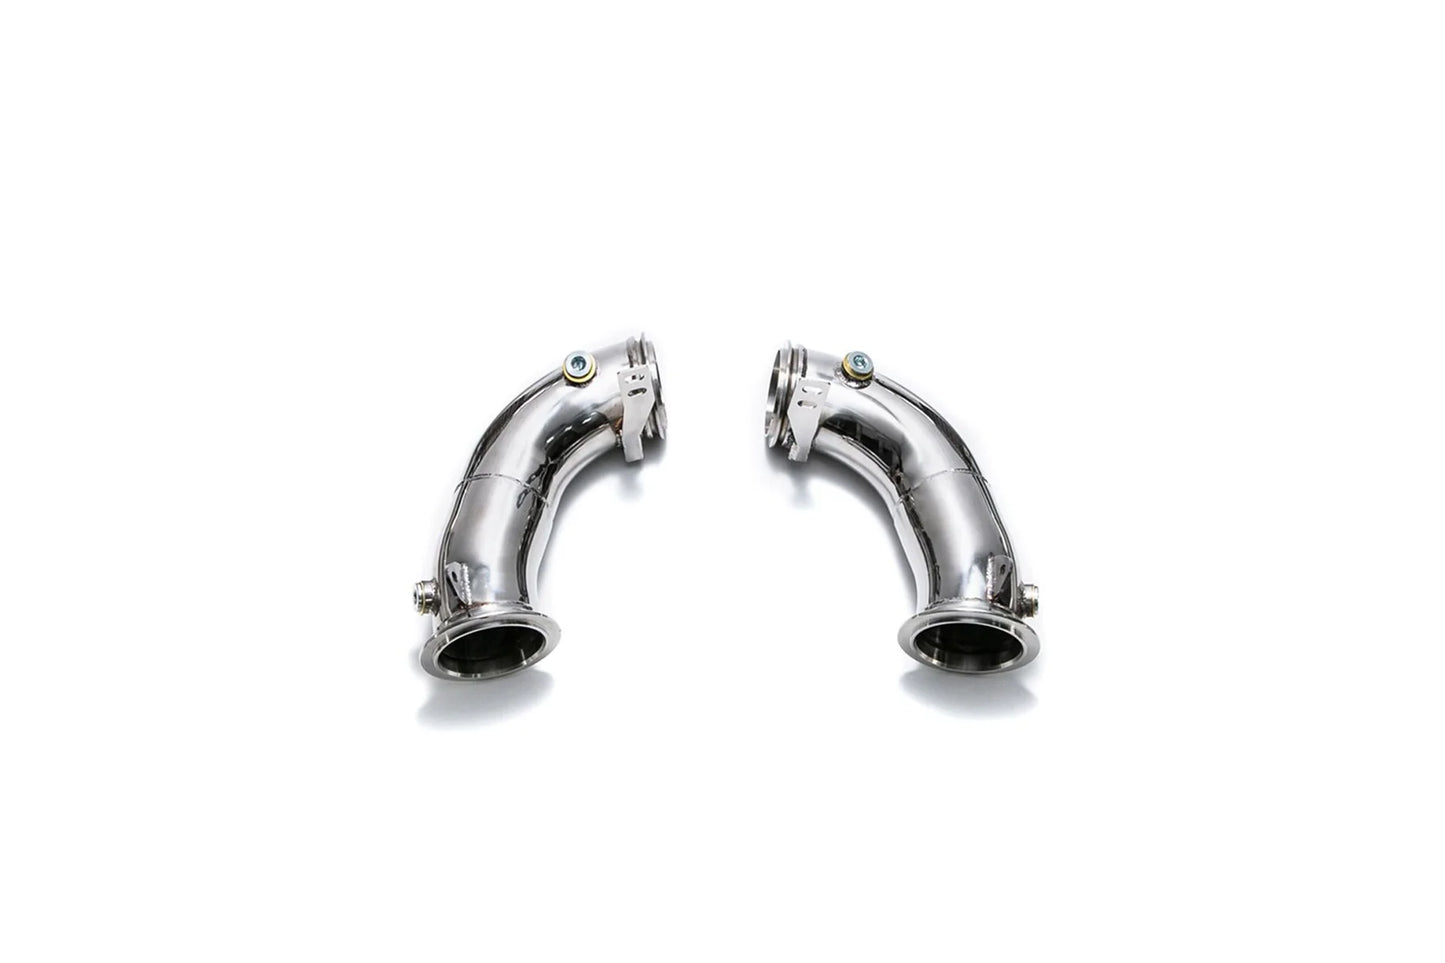 Armytrix BMW M5 F90/ M8 F91/F92 I STAINLESS STEEL DECATTED DOWNPIPE